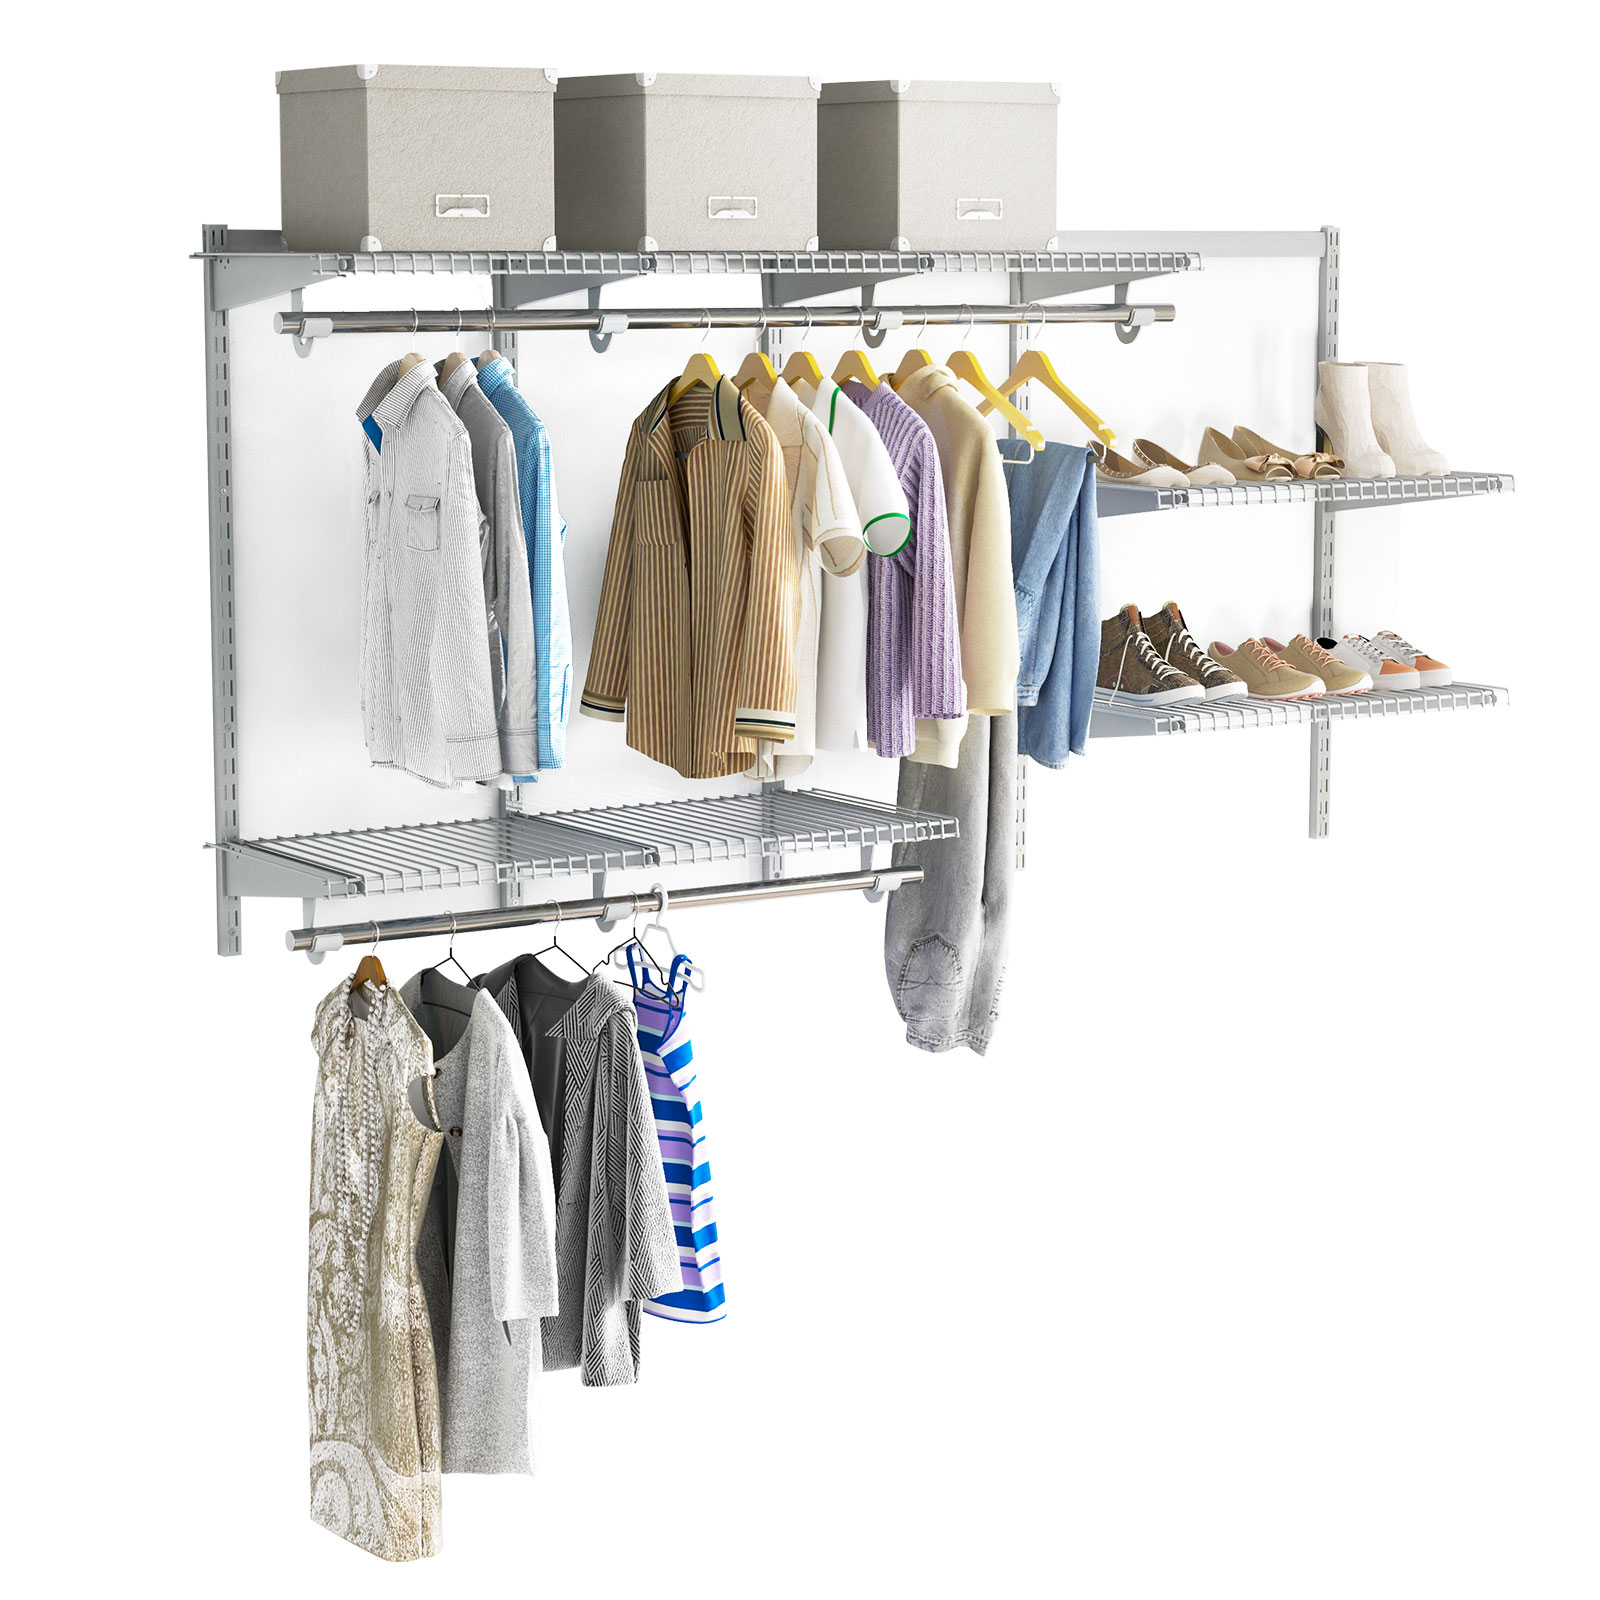 Wall_Mounted_Closet_Organizer_System_with_Wire_Shelving_and_Cloth_Rods-7.jpg